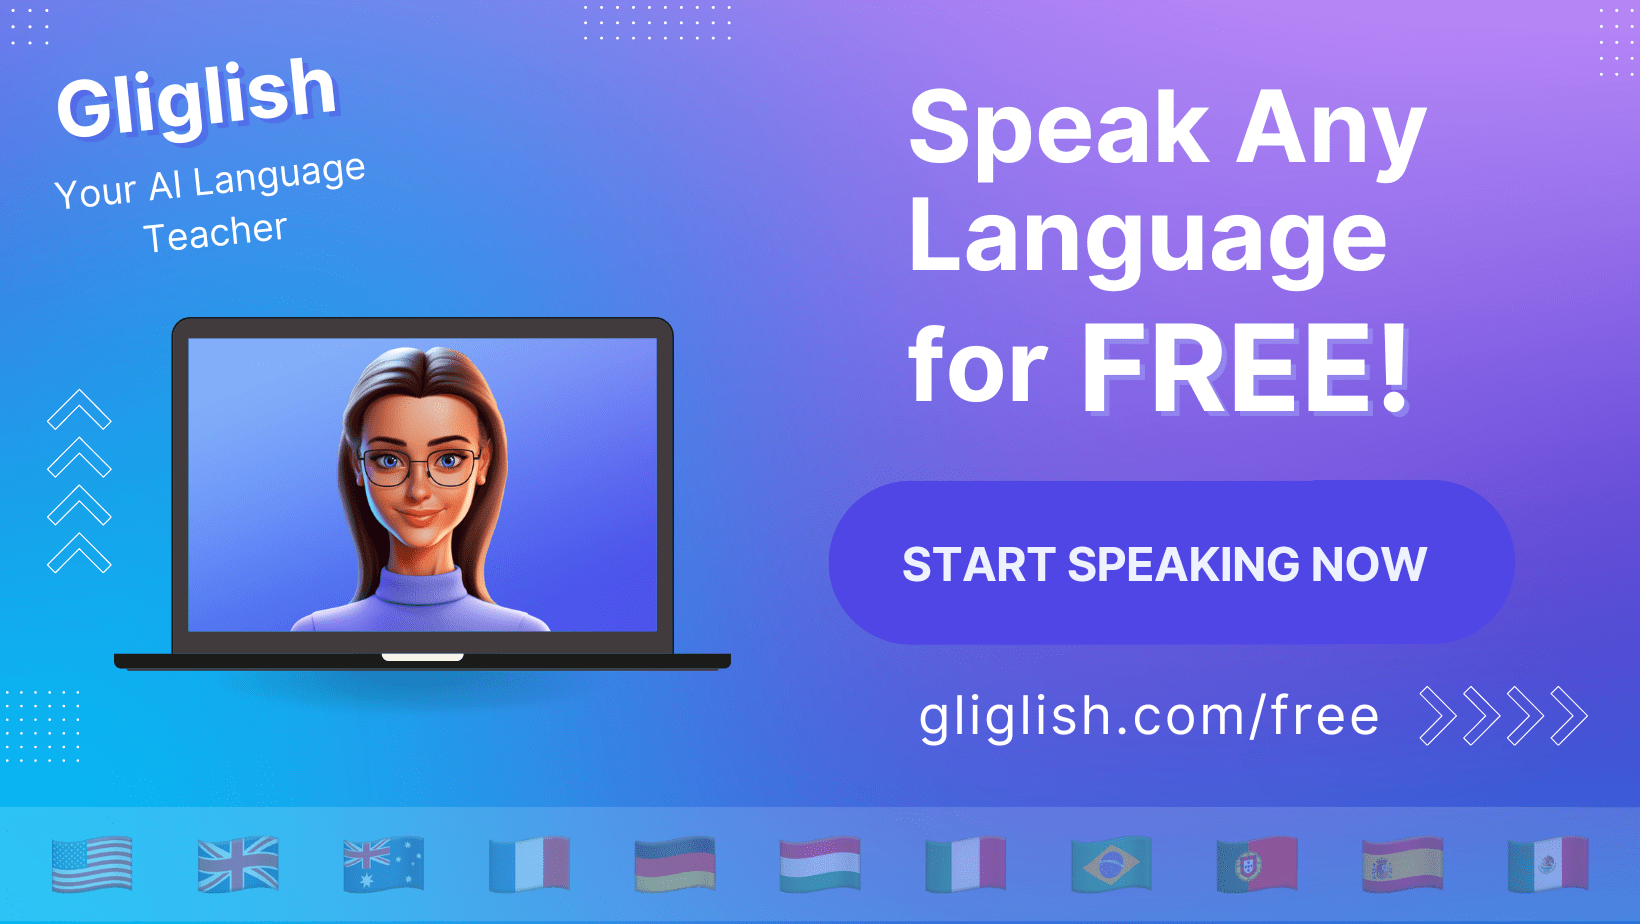 Gliglish - A tool to learn and speak multiple languages